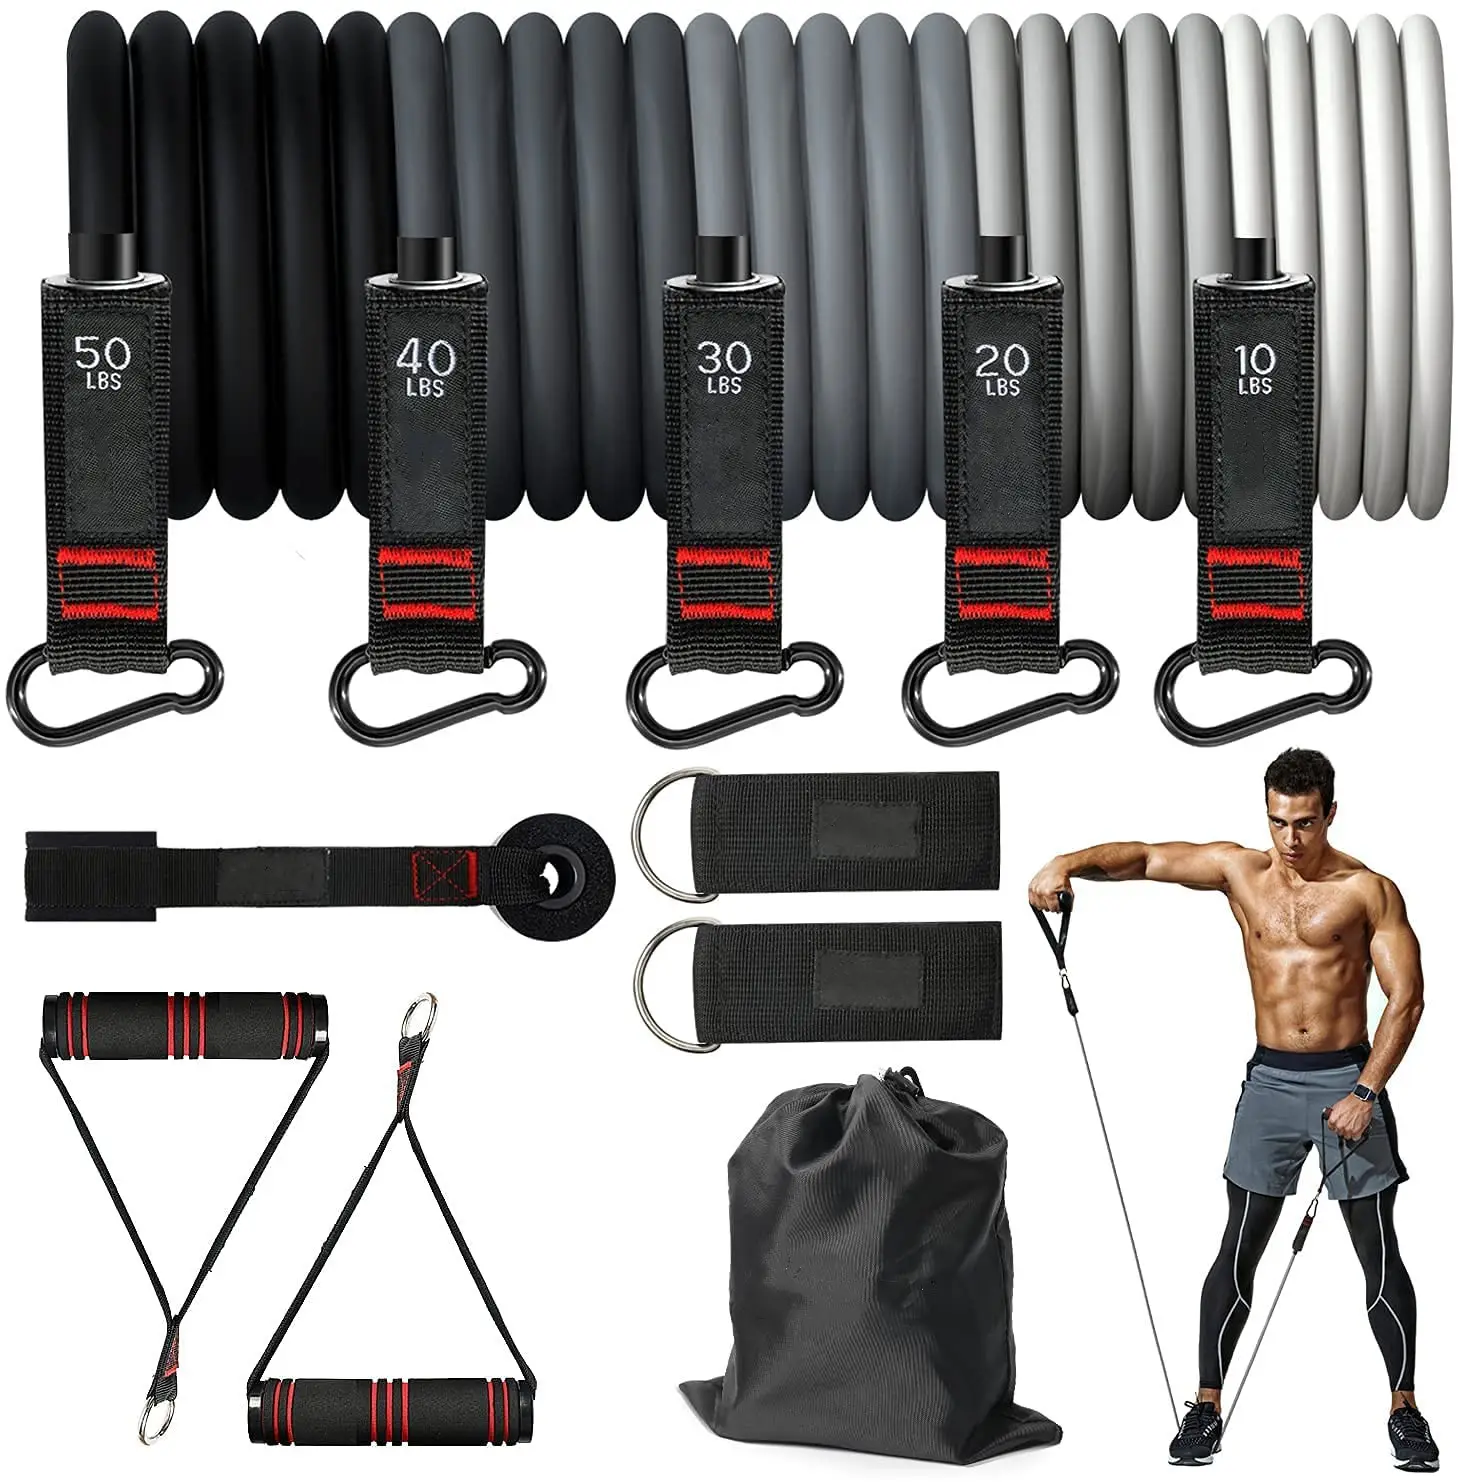 gym accessories Exercise Bands with Handles workout 11 pcs Tpe Latex fitness Resistance Bands set